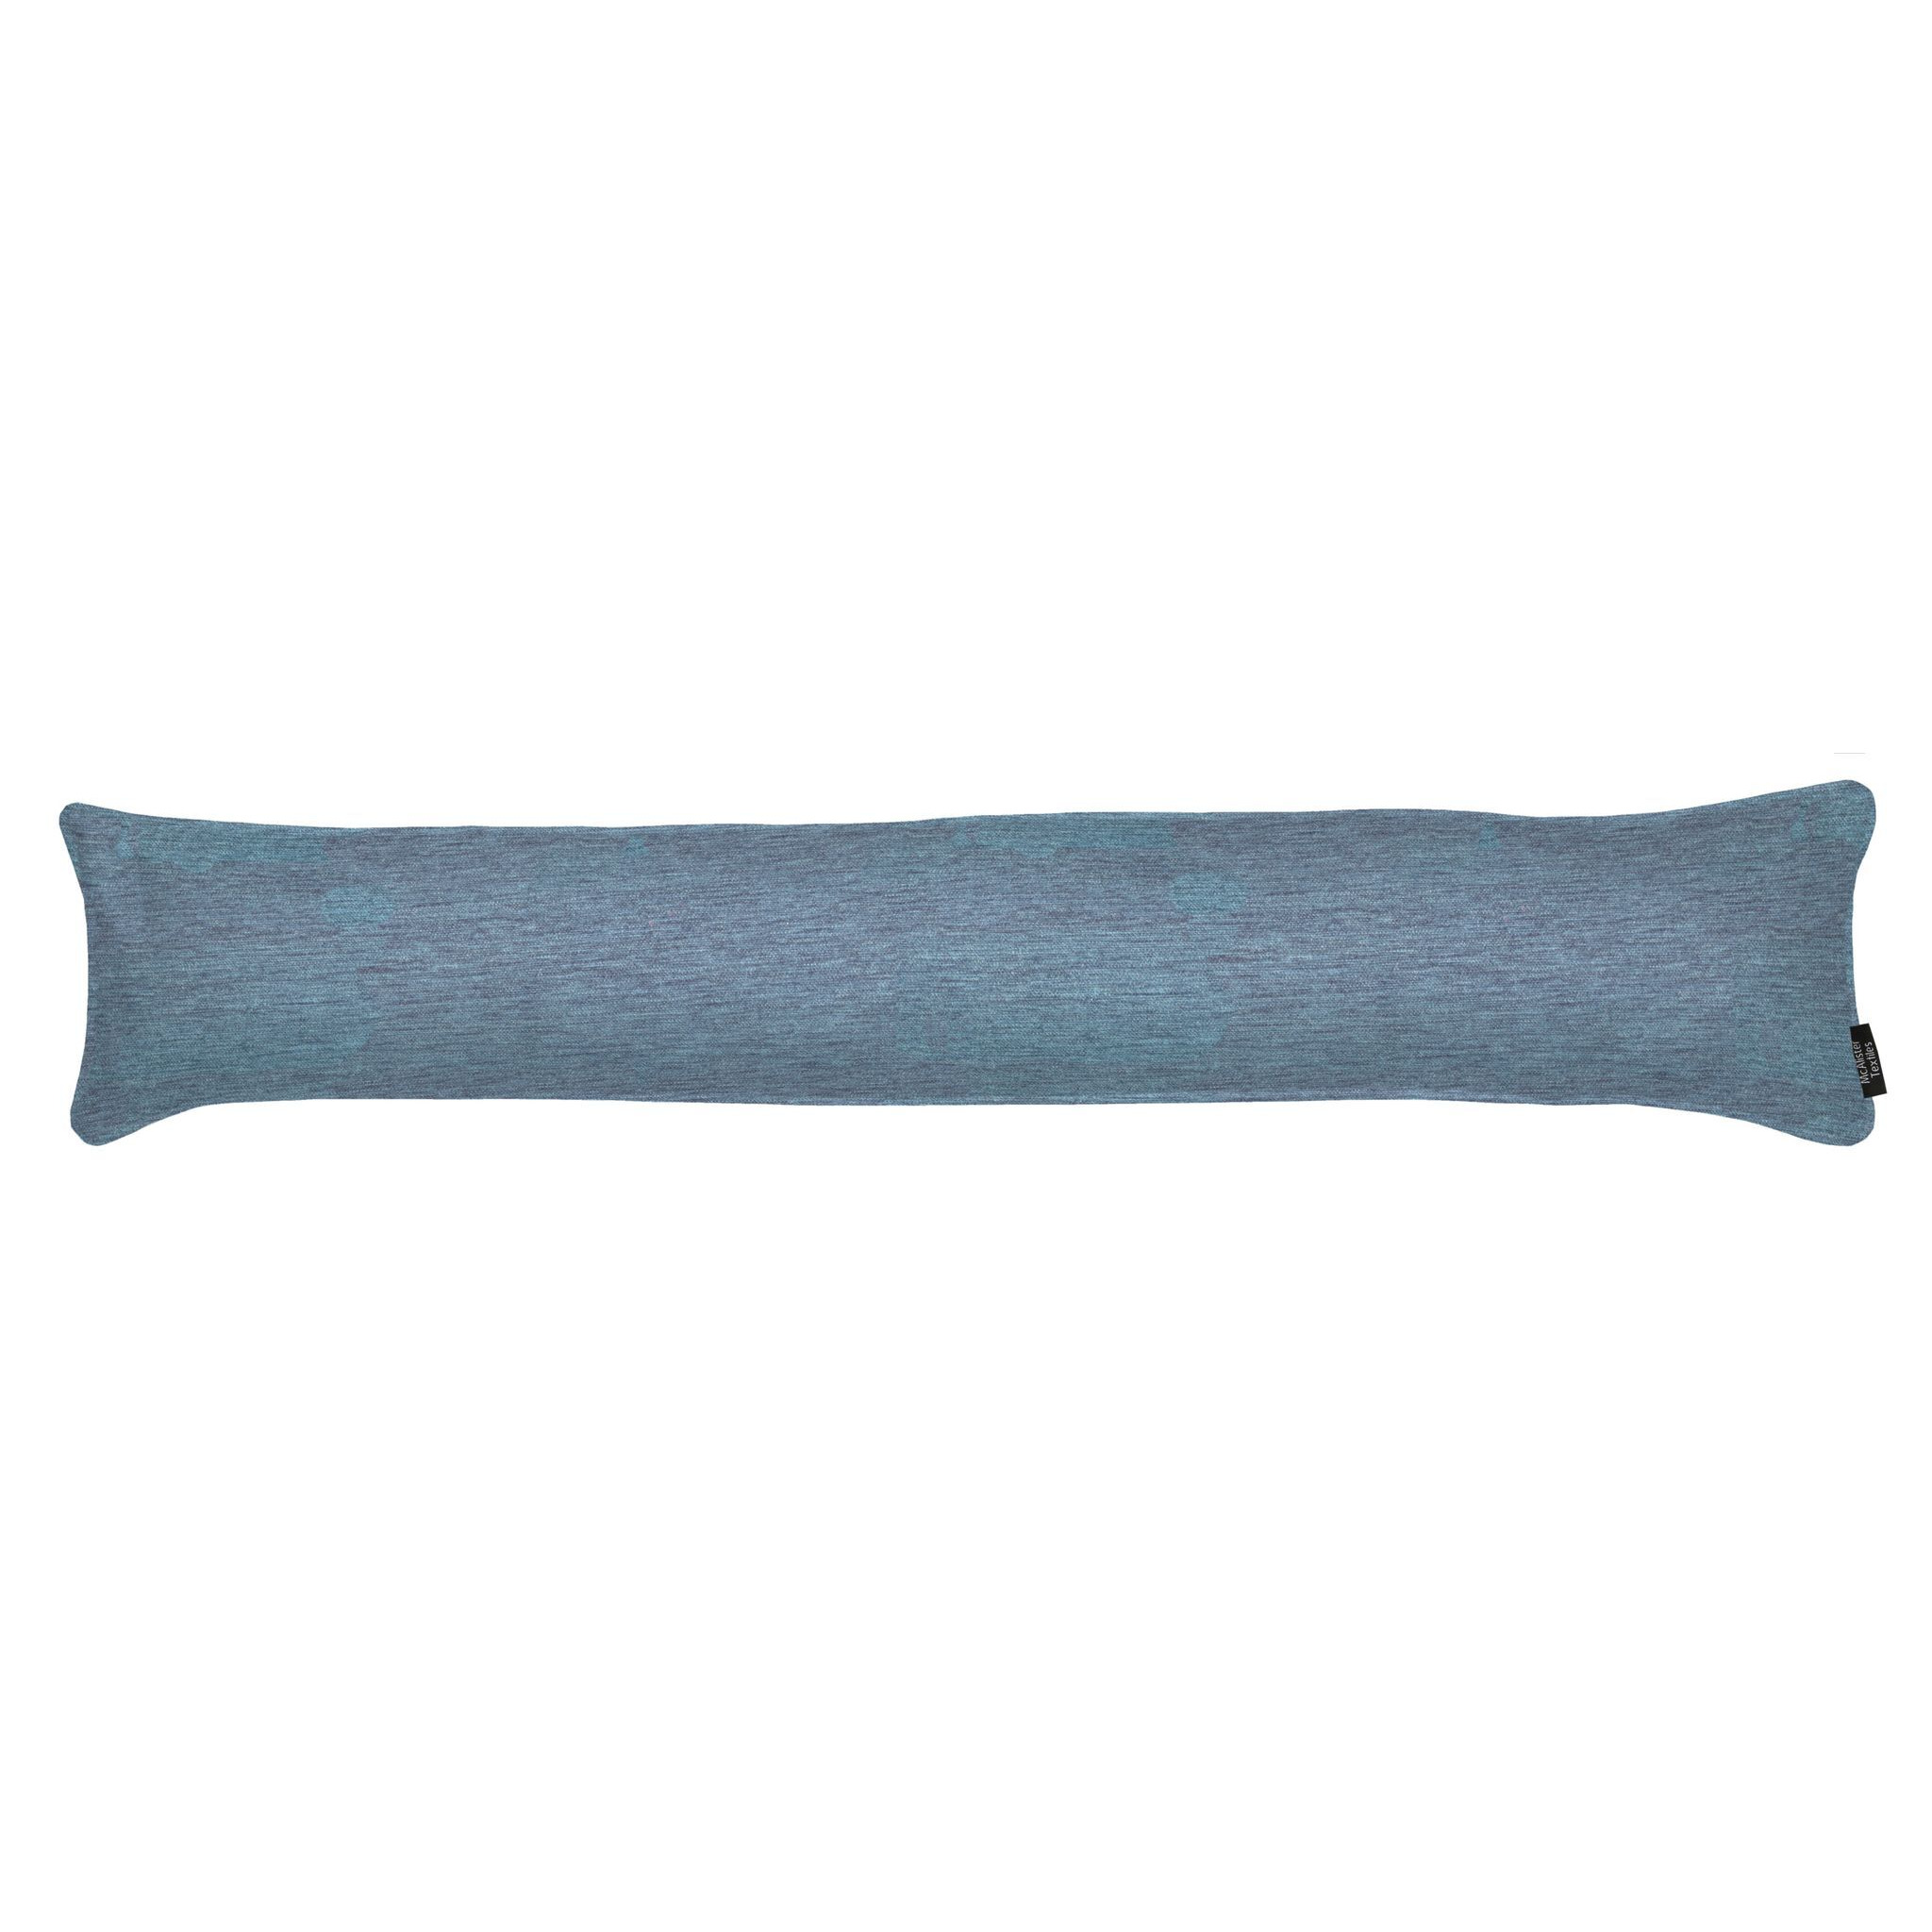 Plain Chenille Wedgewood Blue Draught Excluder, 18cm x 90cm